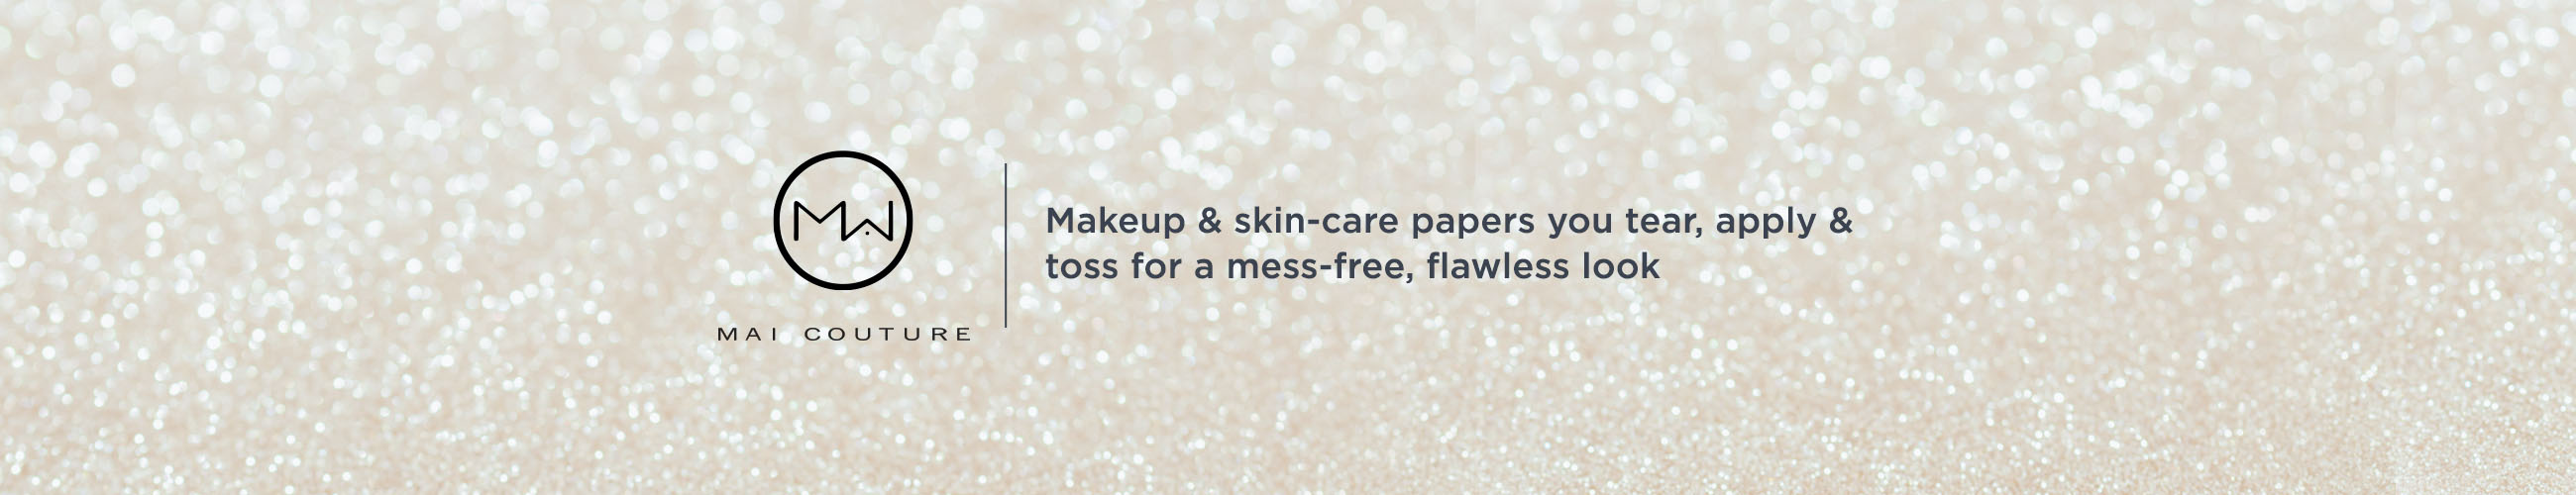 Mai Couture. Makeup & skin-care papers you tear, apply & toss for a mess-free, flawless look